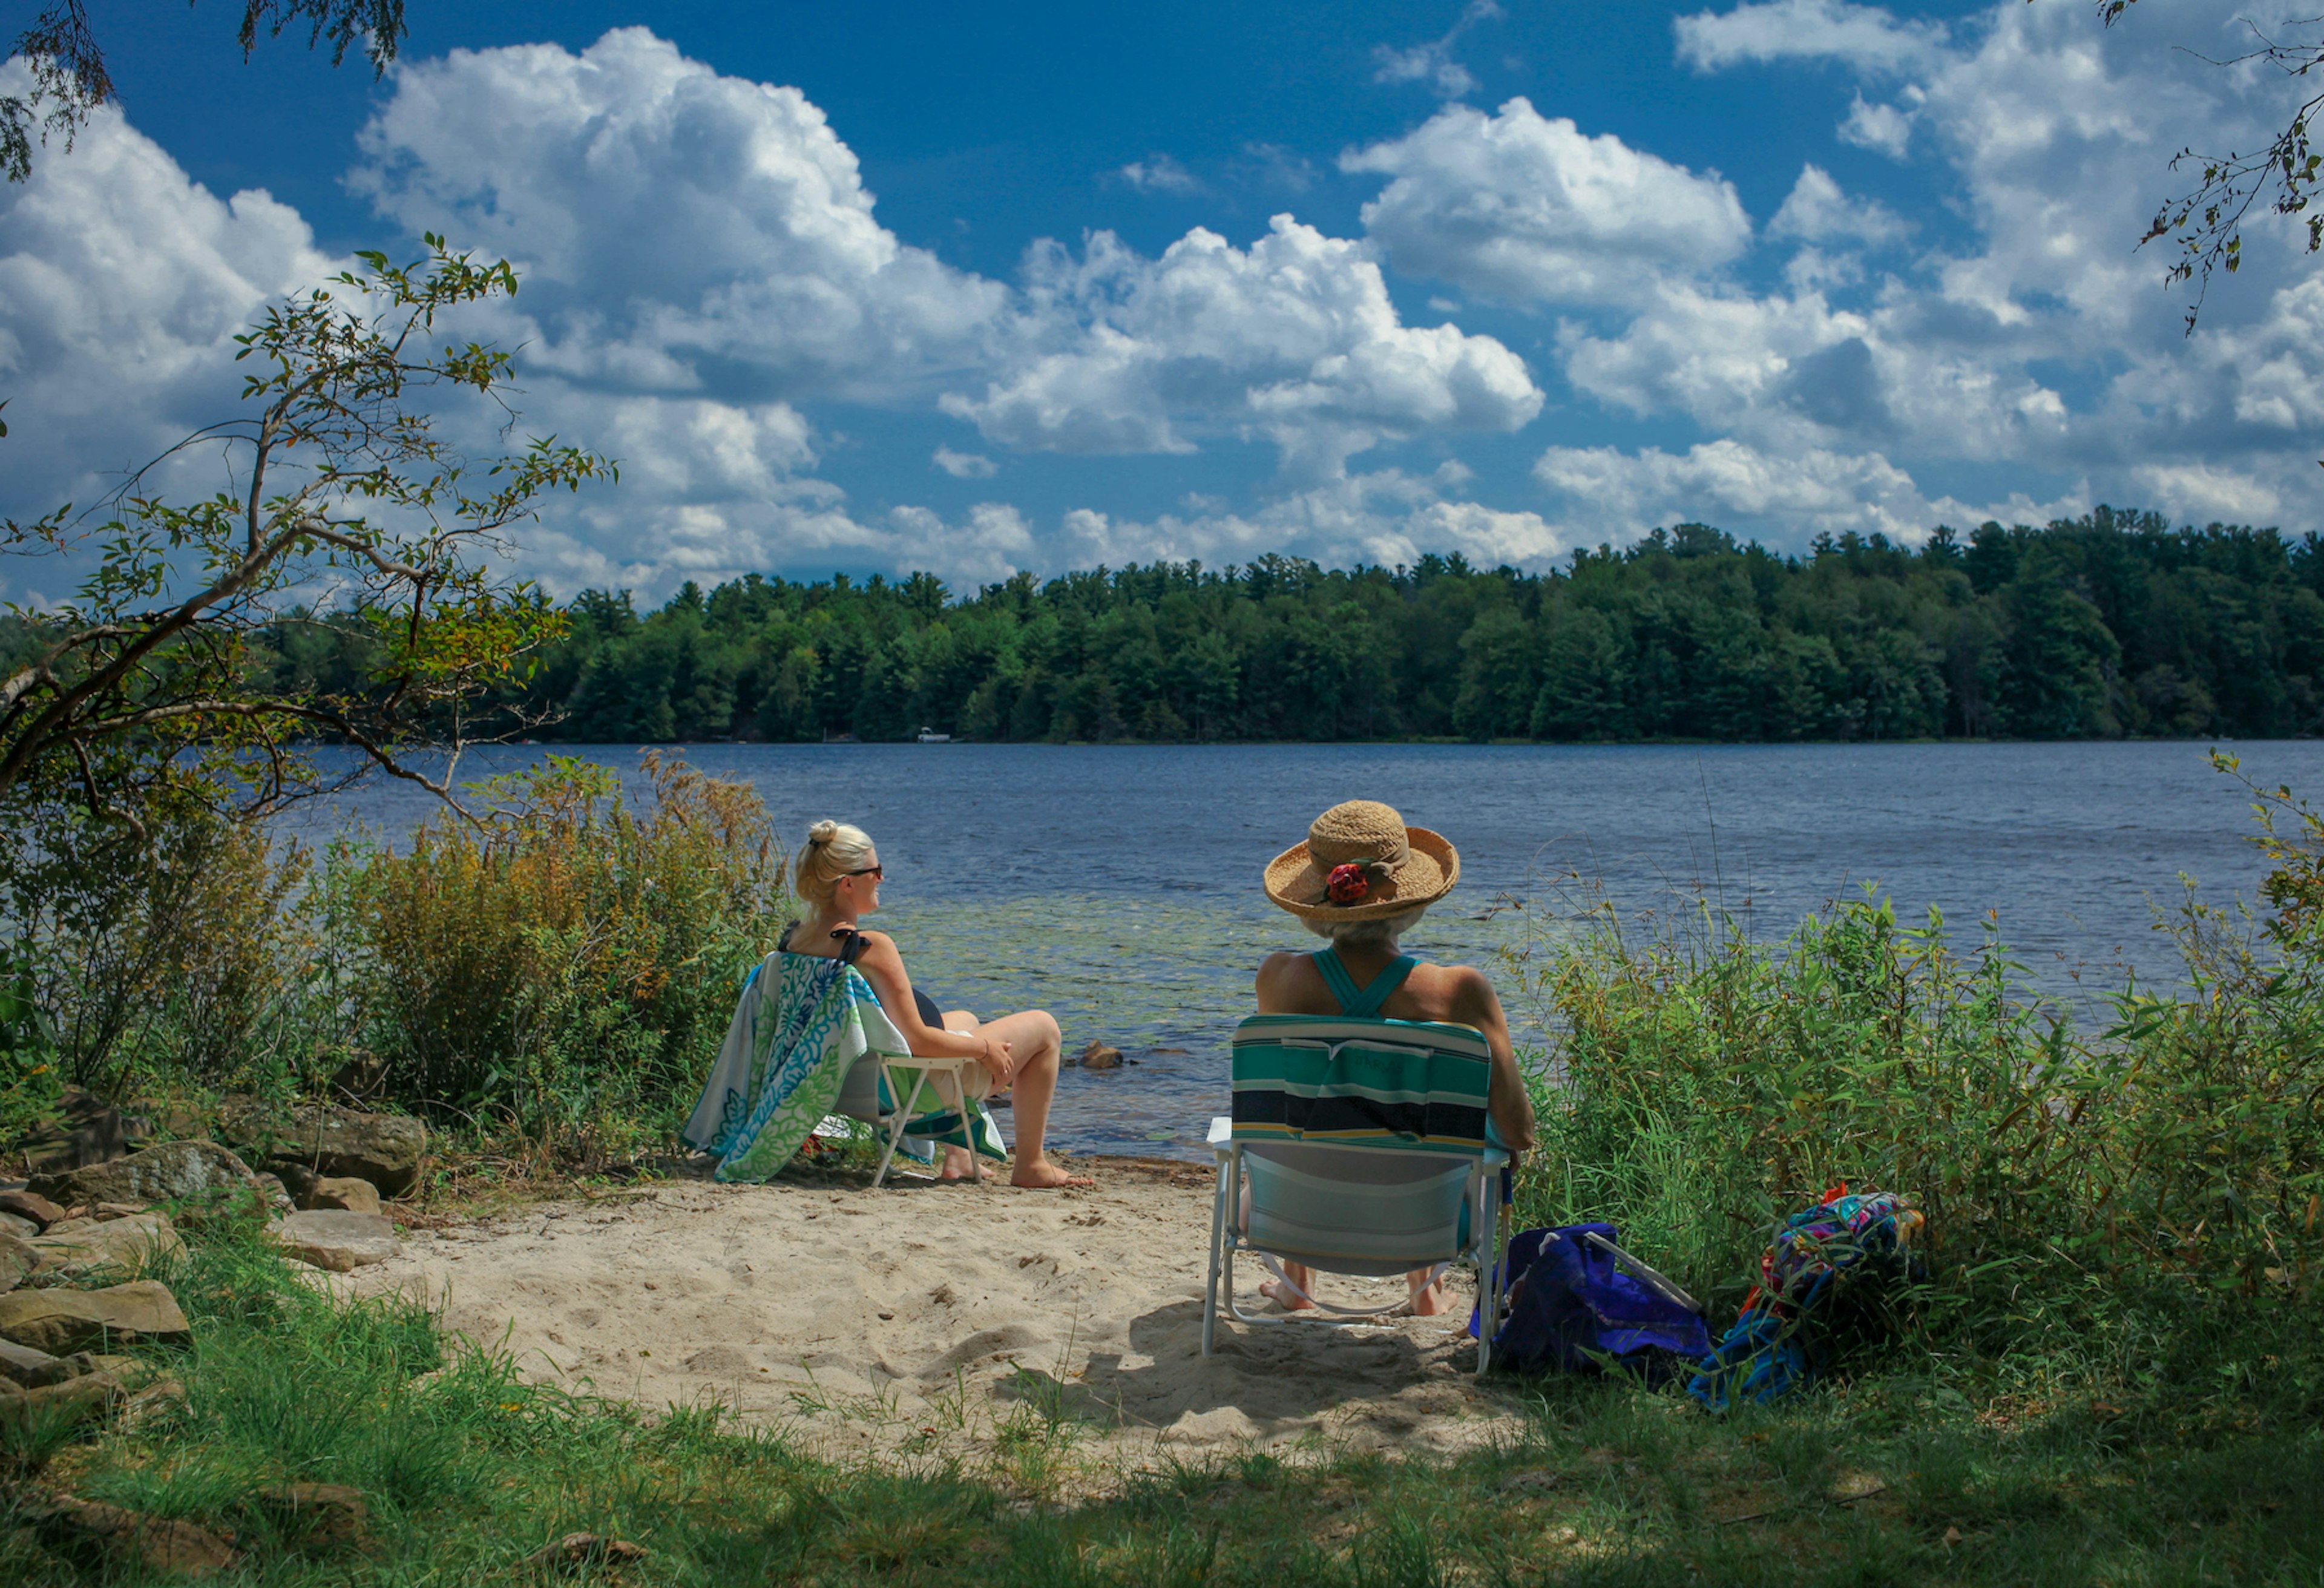 Pocono Lake, PA USA - April 6, 2021: Two Women Sitting by Pocono Lake to Cool Off From Summer Heat; Shutterstock ID 1950967123; your: Brian Healy; gl: 65050; netsuite: Lonely Planet Online Editorial; full: Best time to visit the Poconos